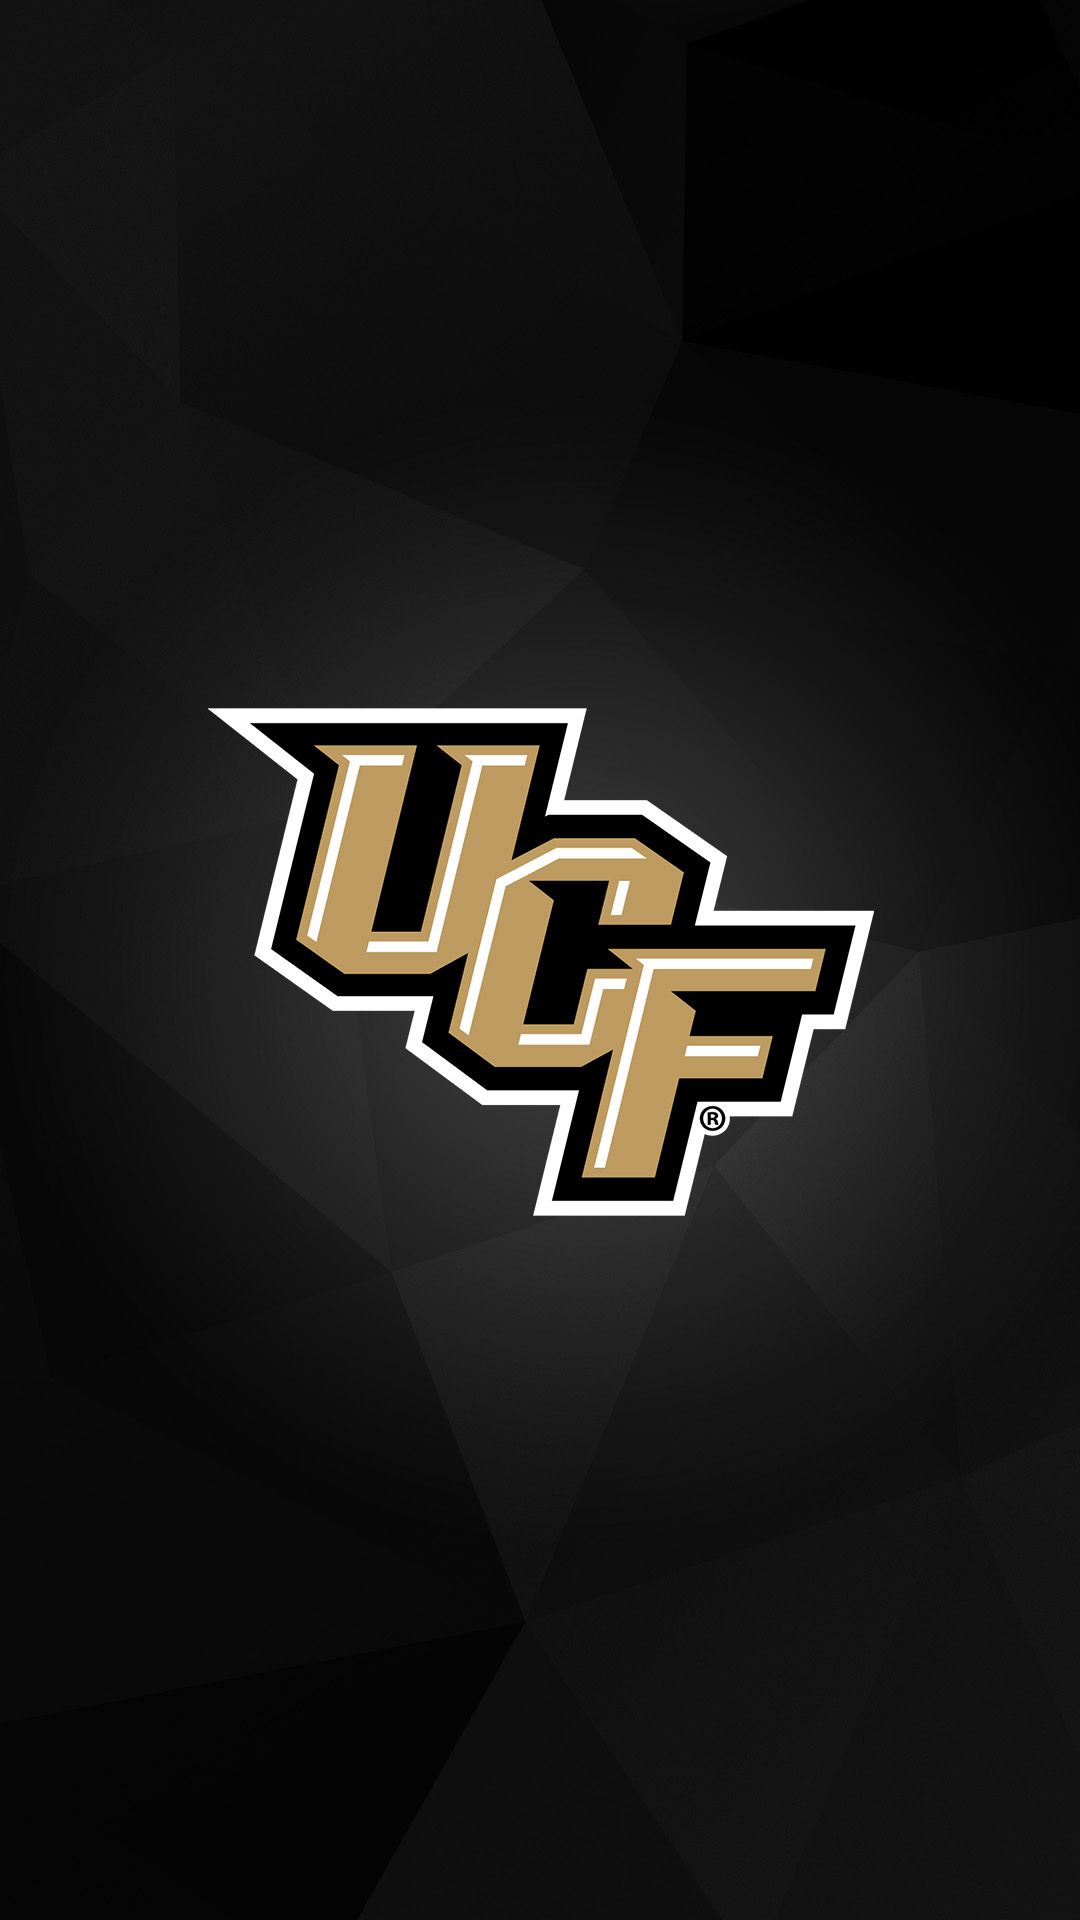 19 UCF ideas  ucf university of central florida ucf knights